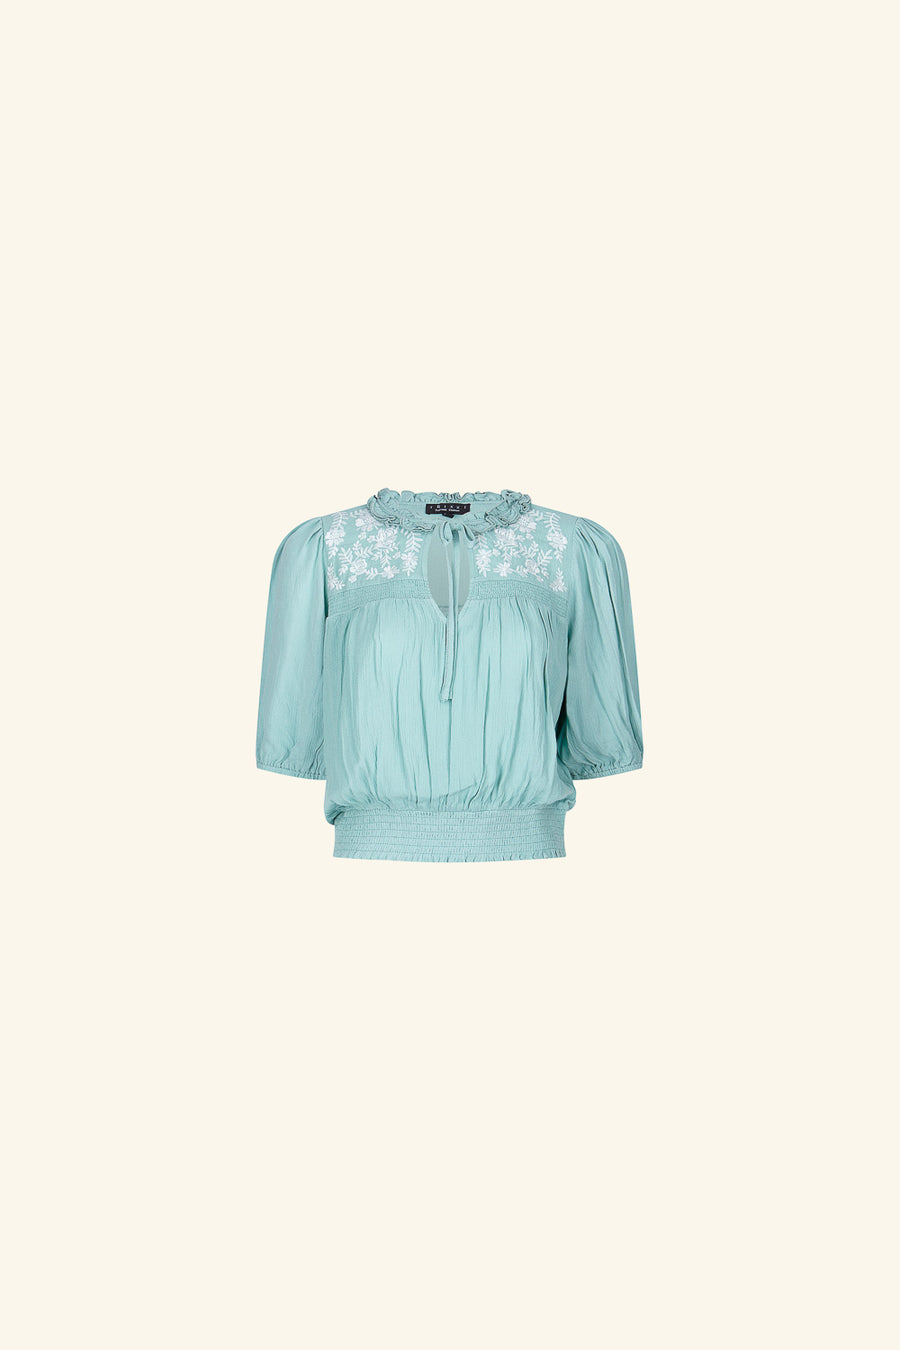 Sage Embroidered Top - Trixxi Clothing